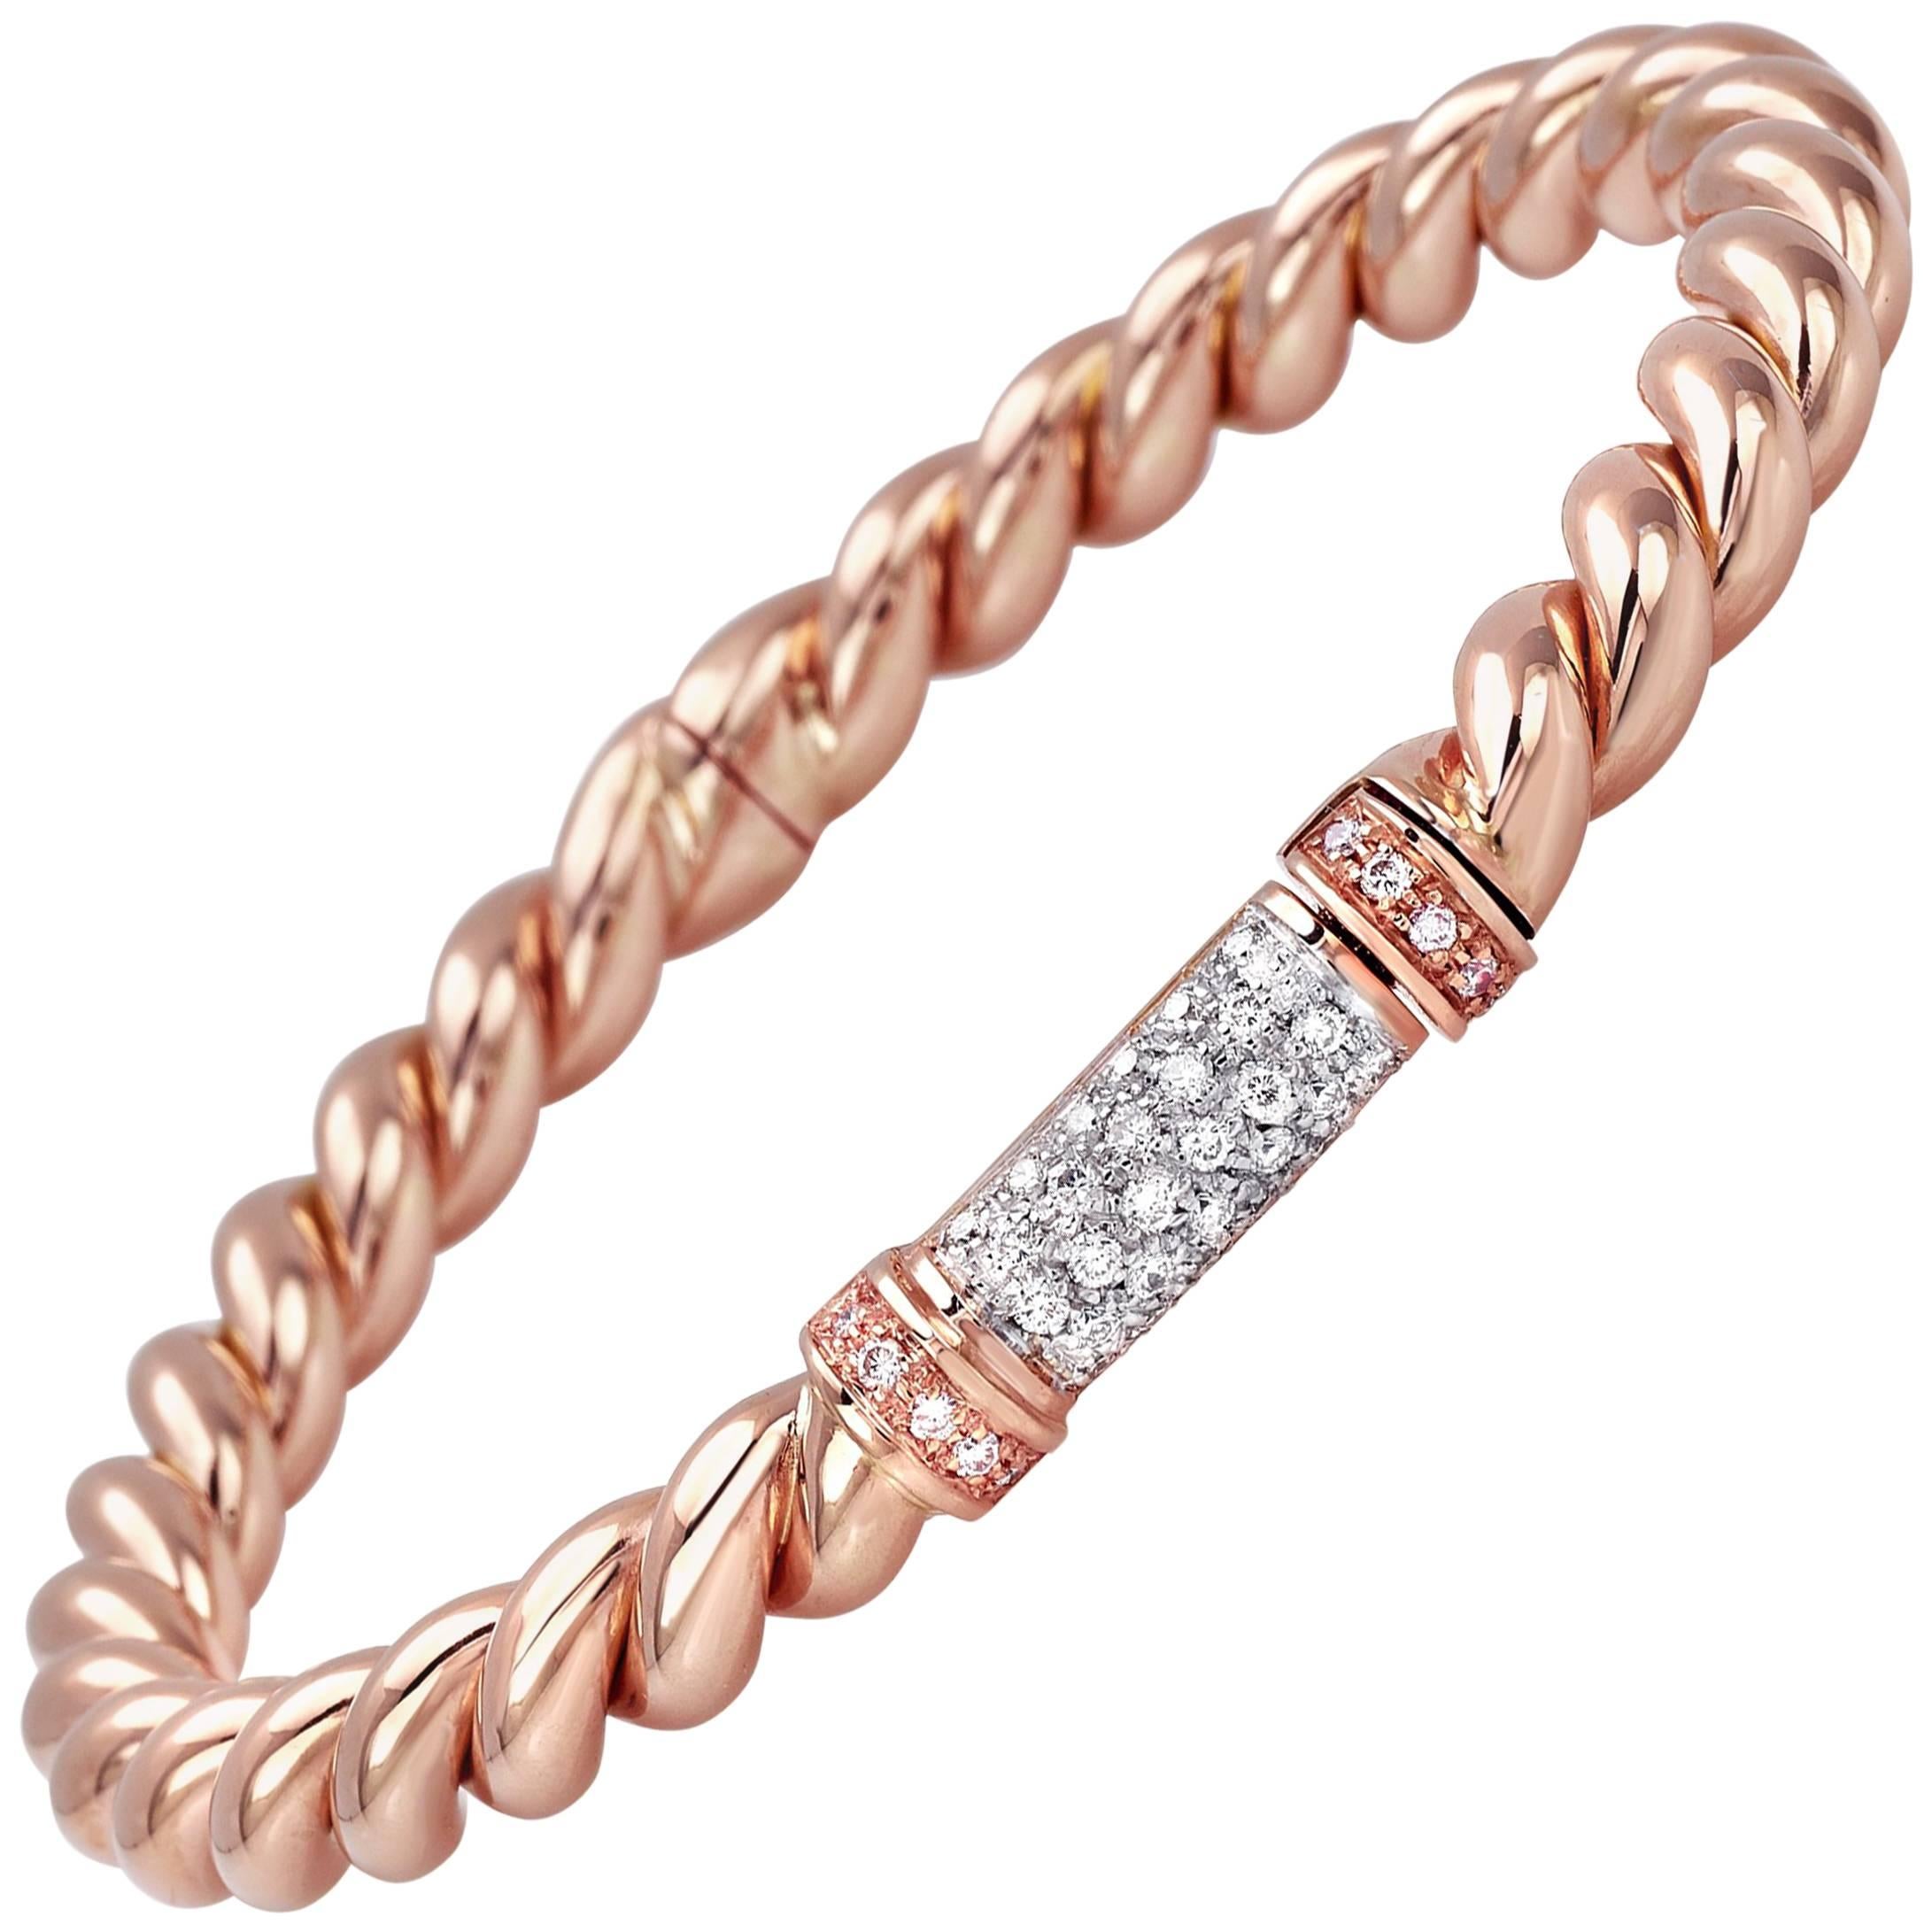 Bangle from the Collection "Rope" 18 Karat Rose Gold and Diamonds For Sale